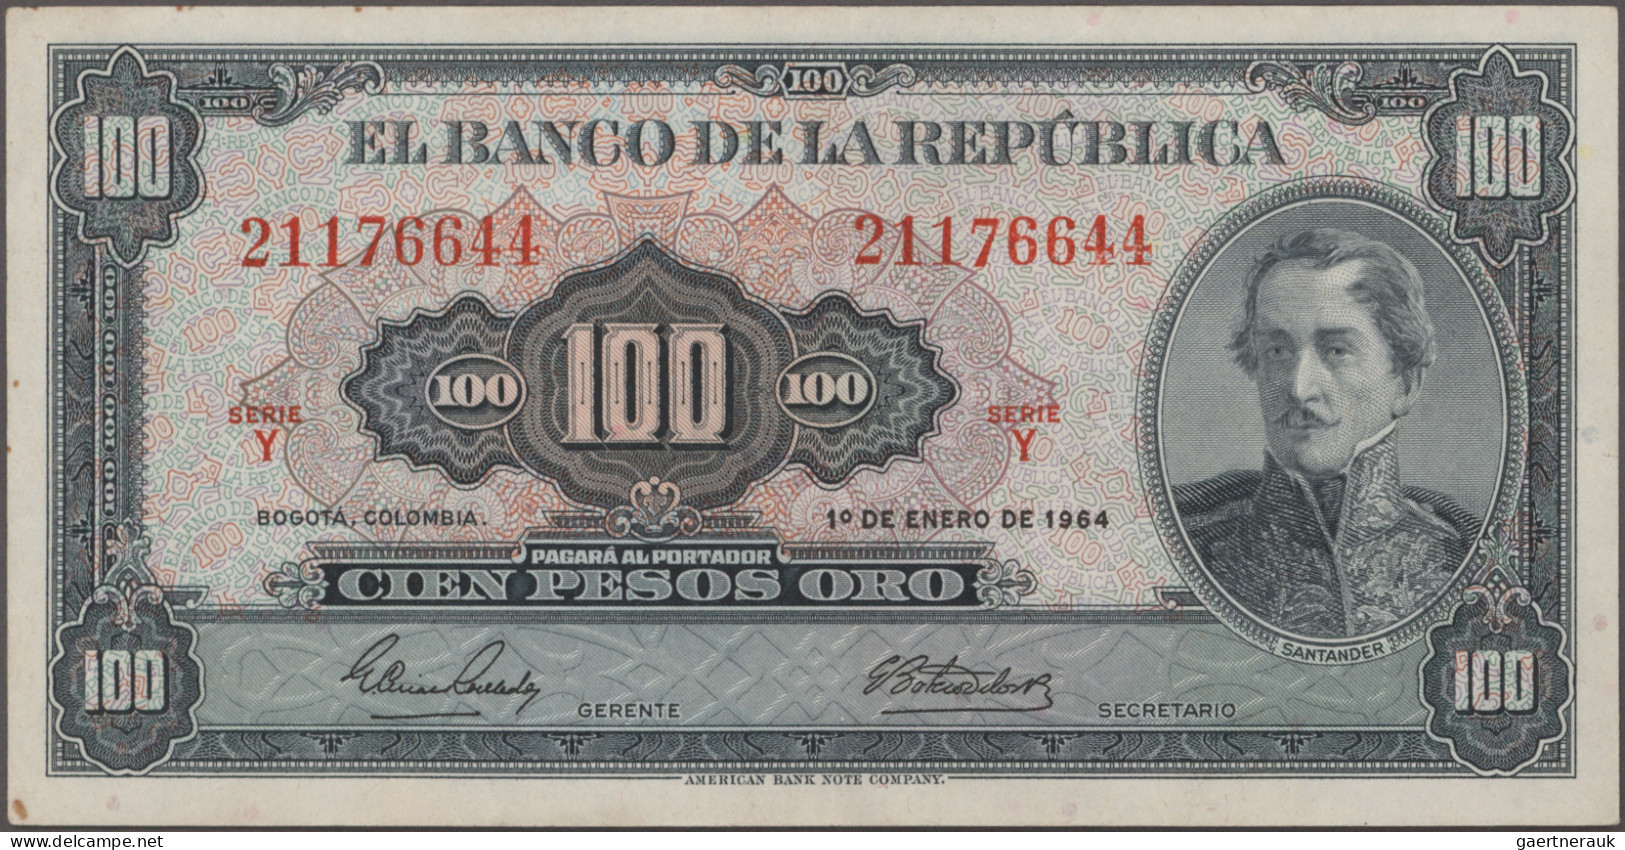 Colombia: Huge lot with 46 banknotes, series 1887-2011, comprising for example 2